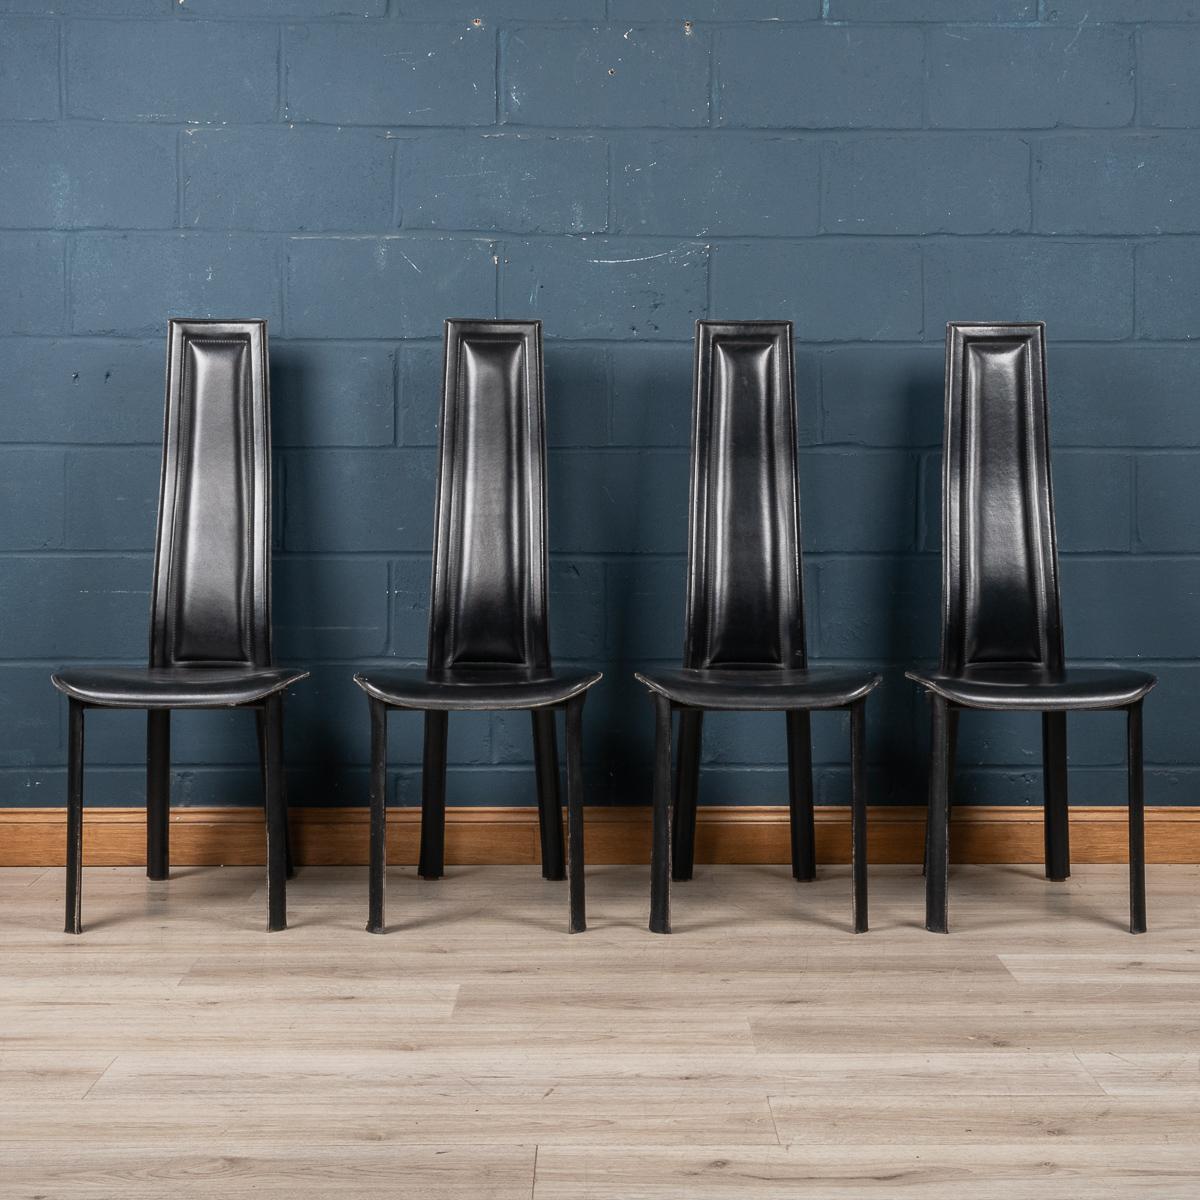 20th Century Italian Set Of Four Dining Chairs By Giorgio Cattelan For Emmepi In Good Condition For Sale In Royal Tunbridge Wells, Kent